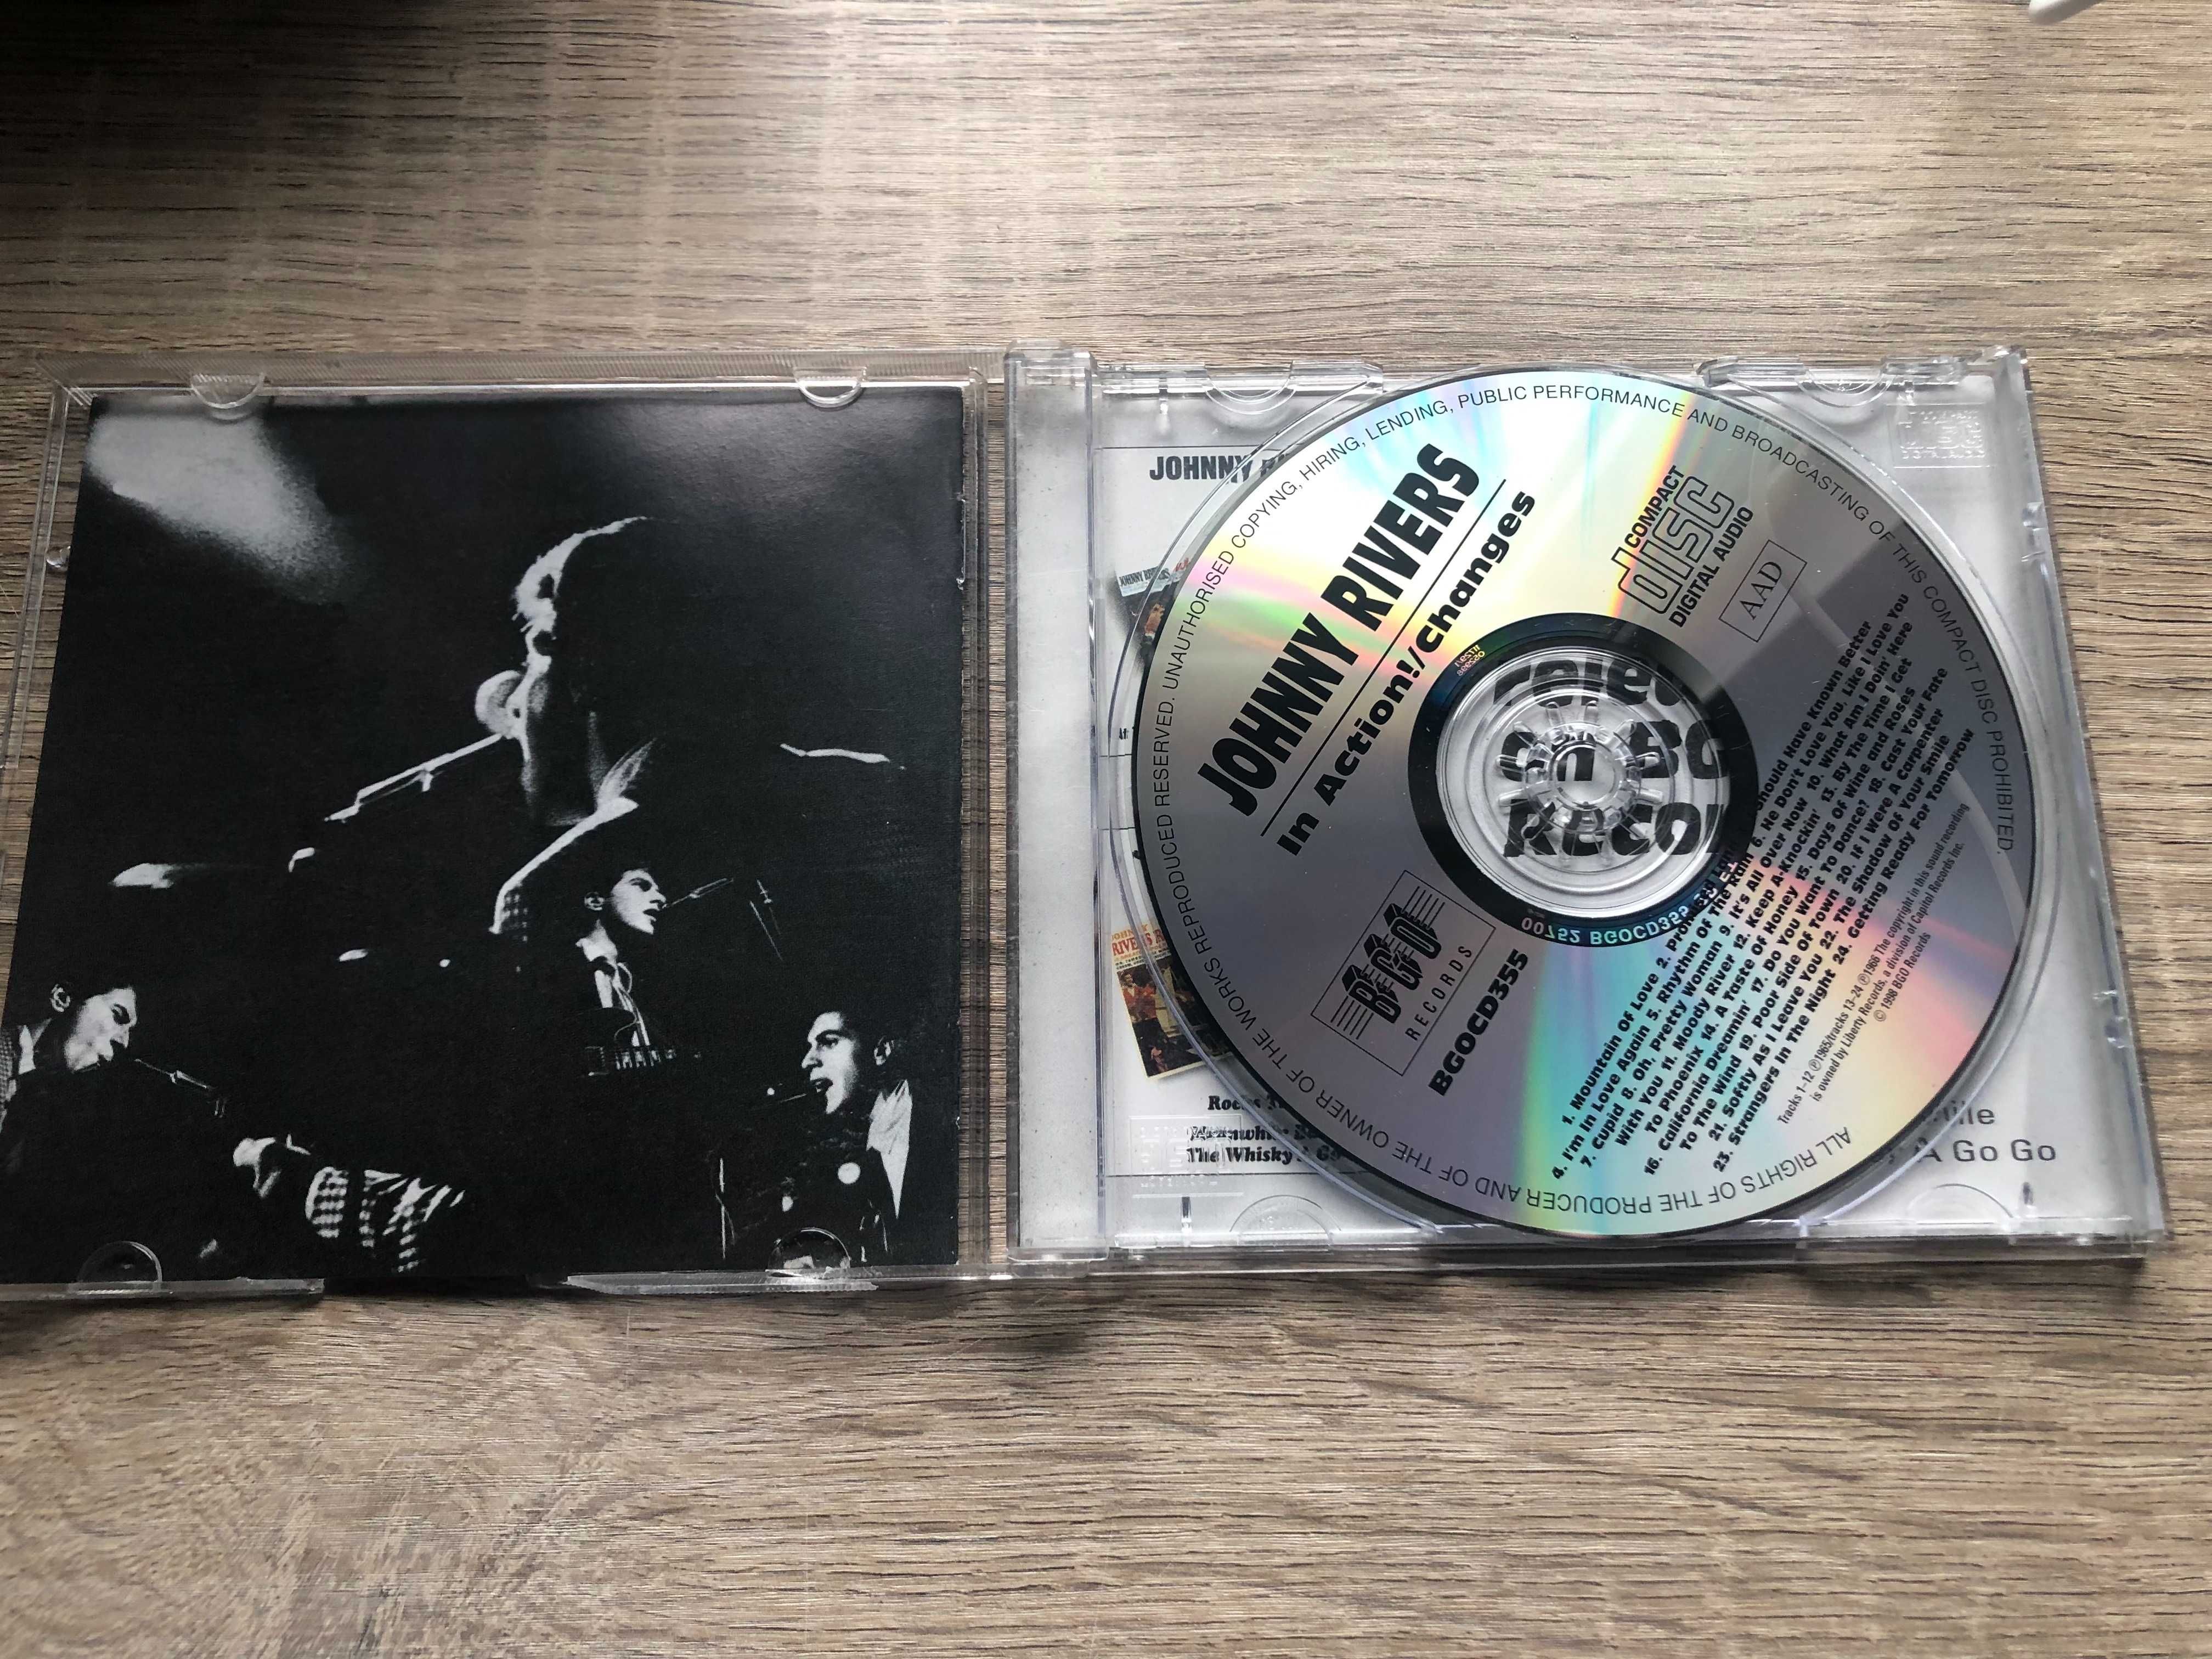 Johnny Rivers In Action + Changes płyta CD